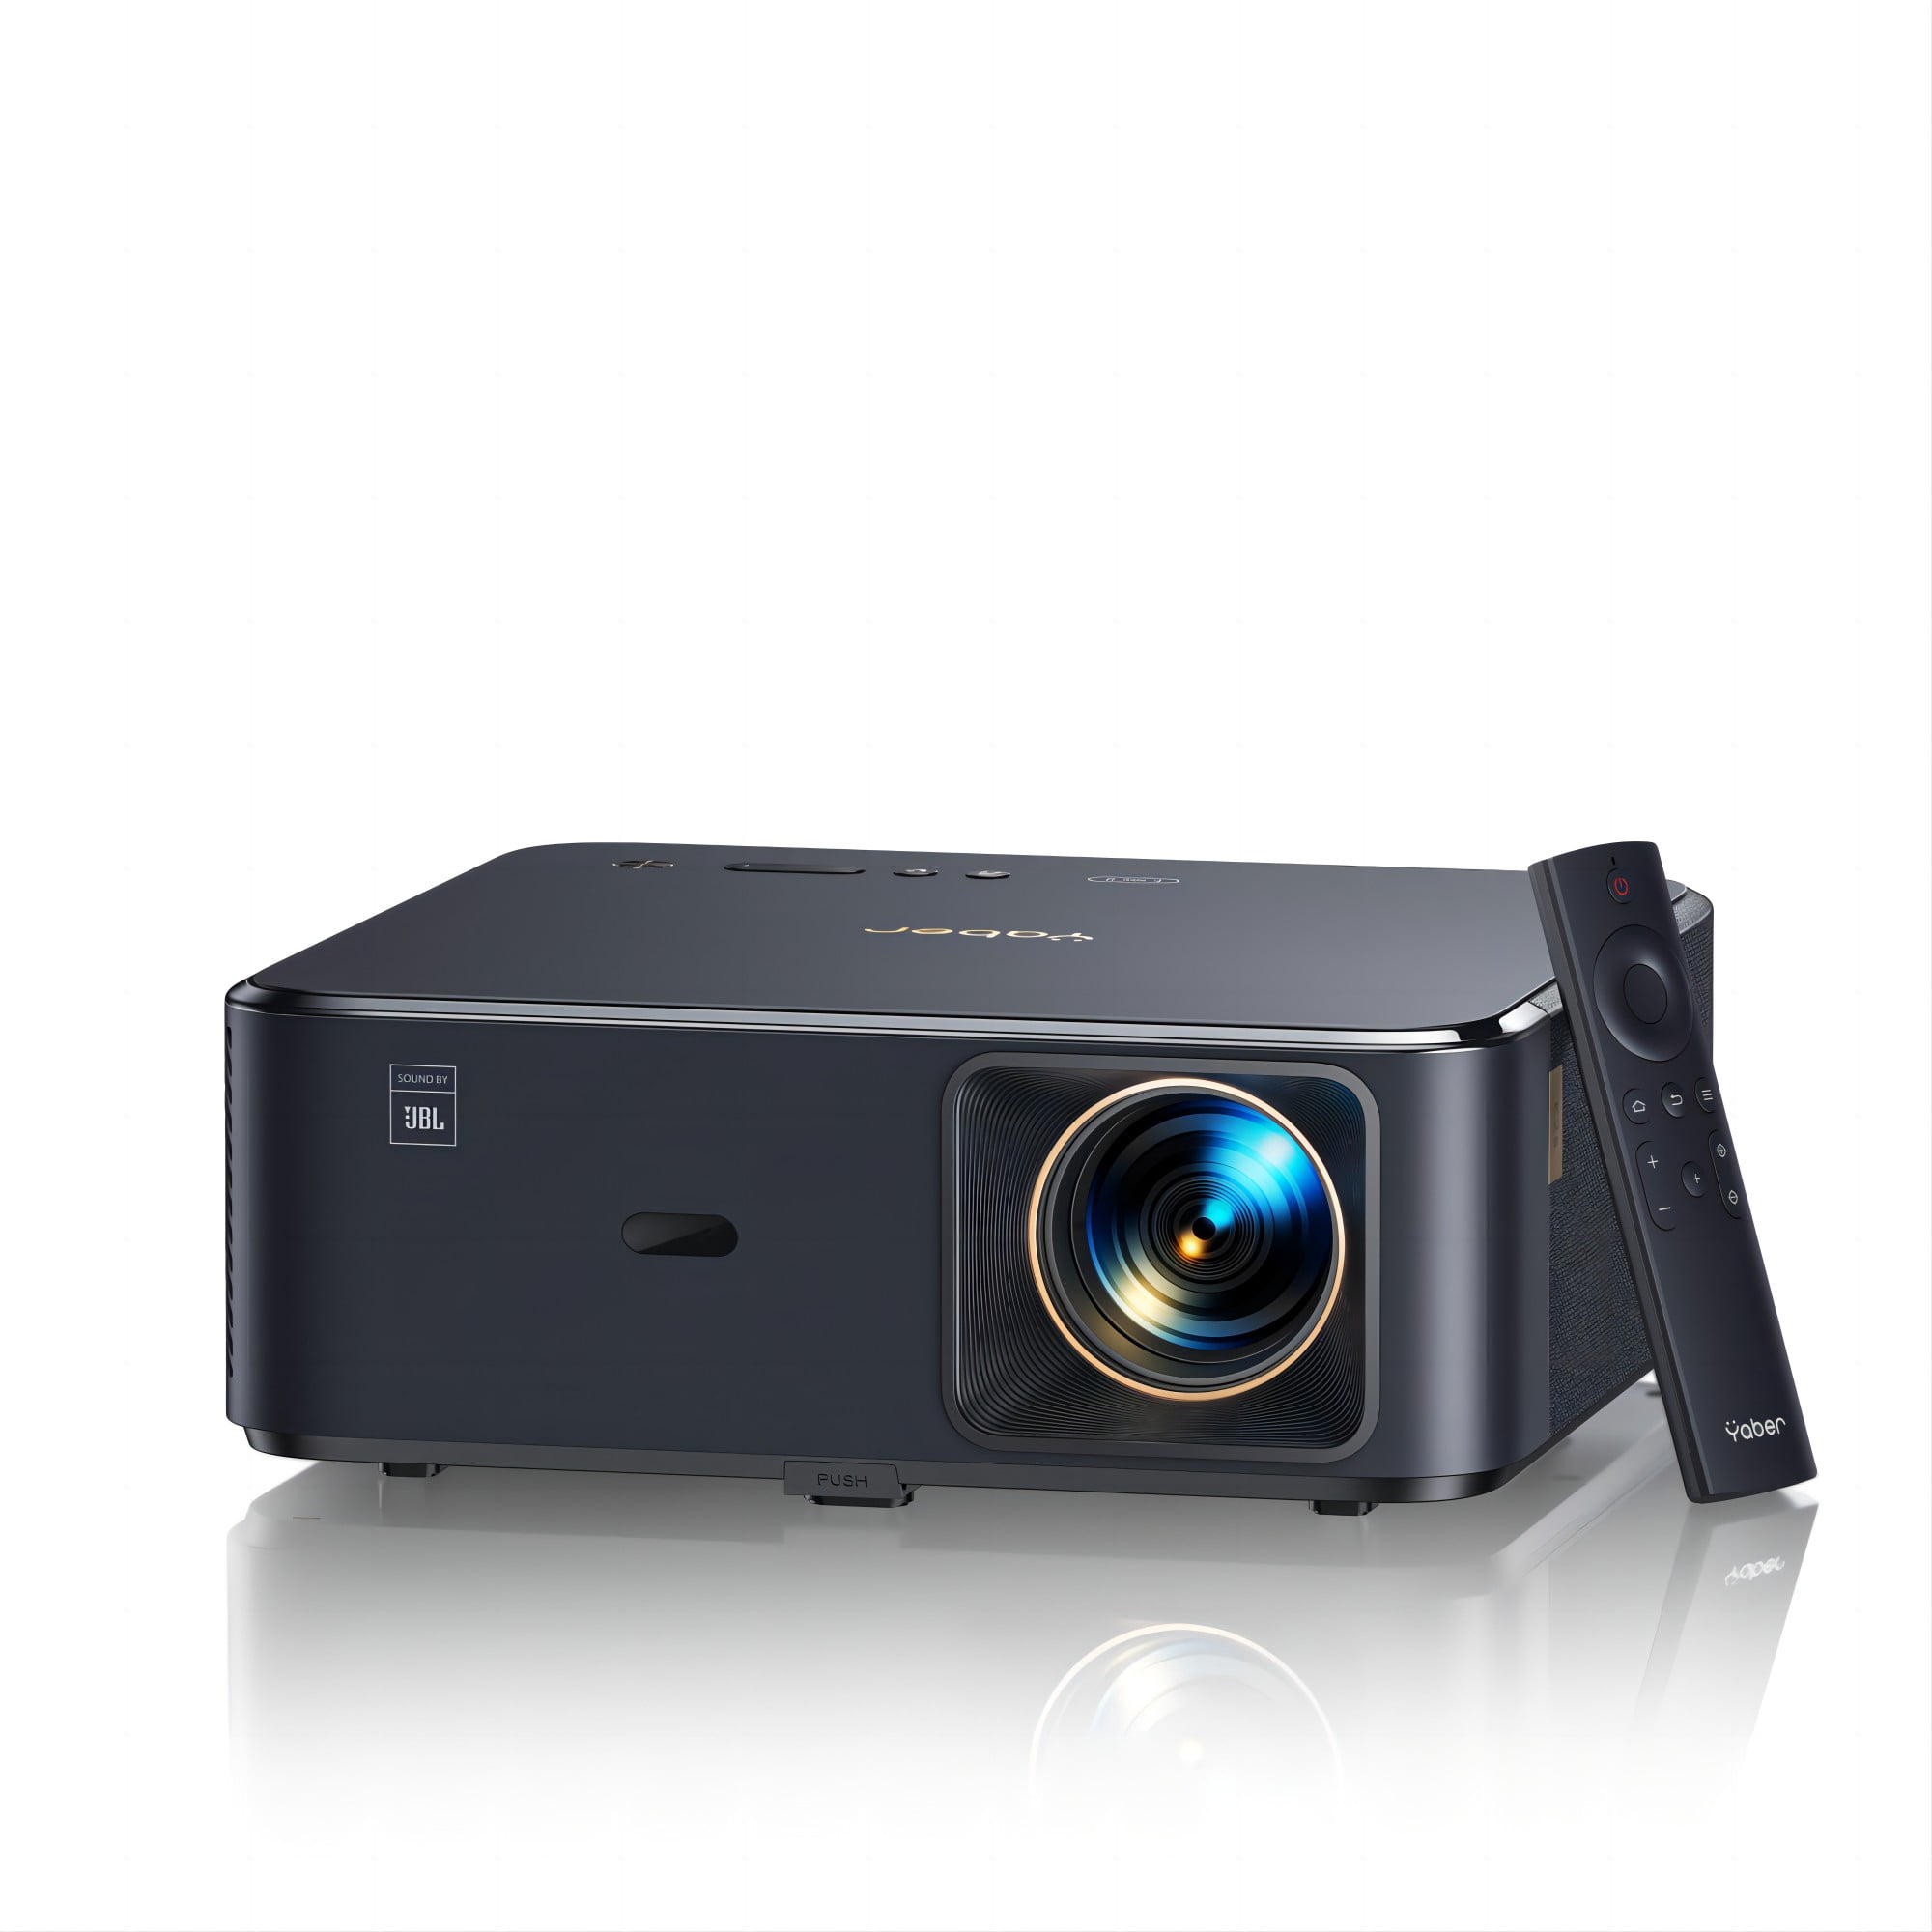  Customer reviews: [Auto Focus/4K Support] Projector with WiFi 6  and Bluetooth 5.2, Projector 4K, WiMiUS P62 Native 1080P Outdoor Movie  Projector, Auto Keystone & 50% Zoom, Smart Home Projector for  iOS/Android/TV